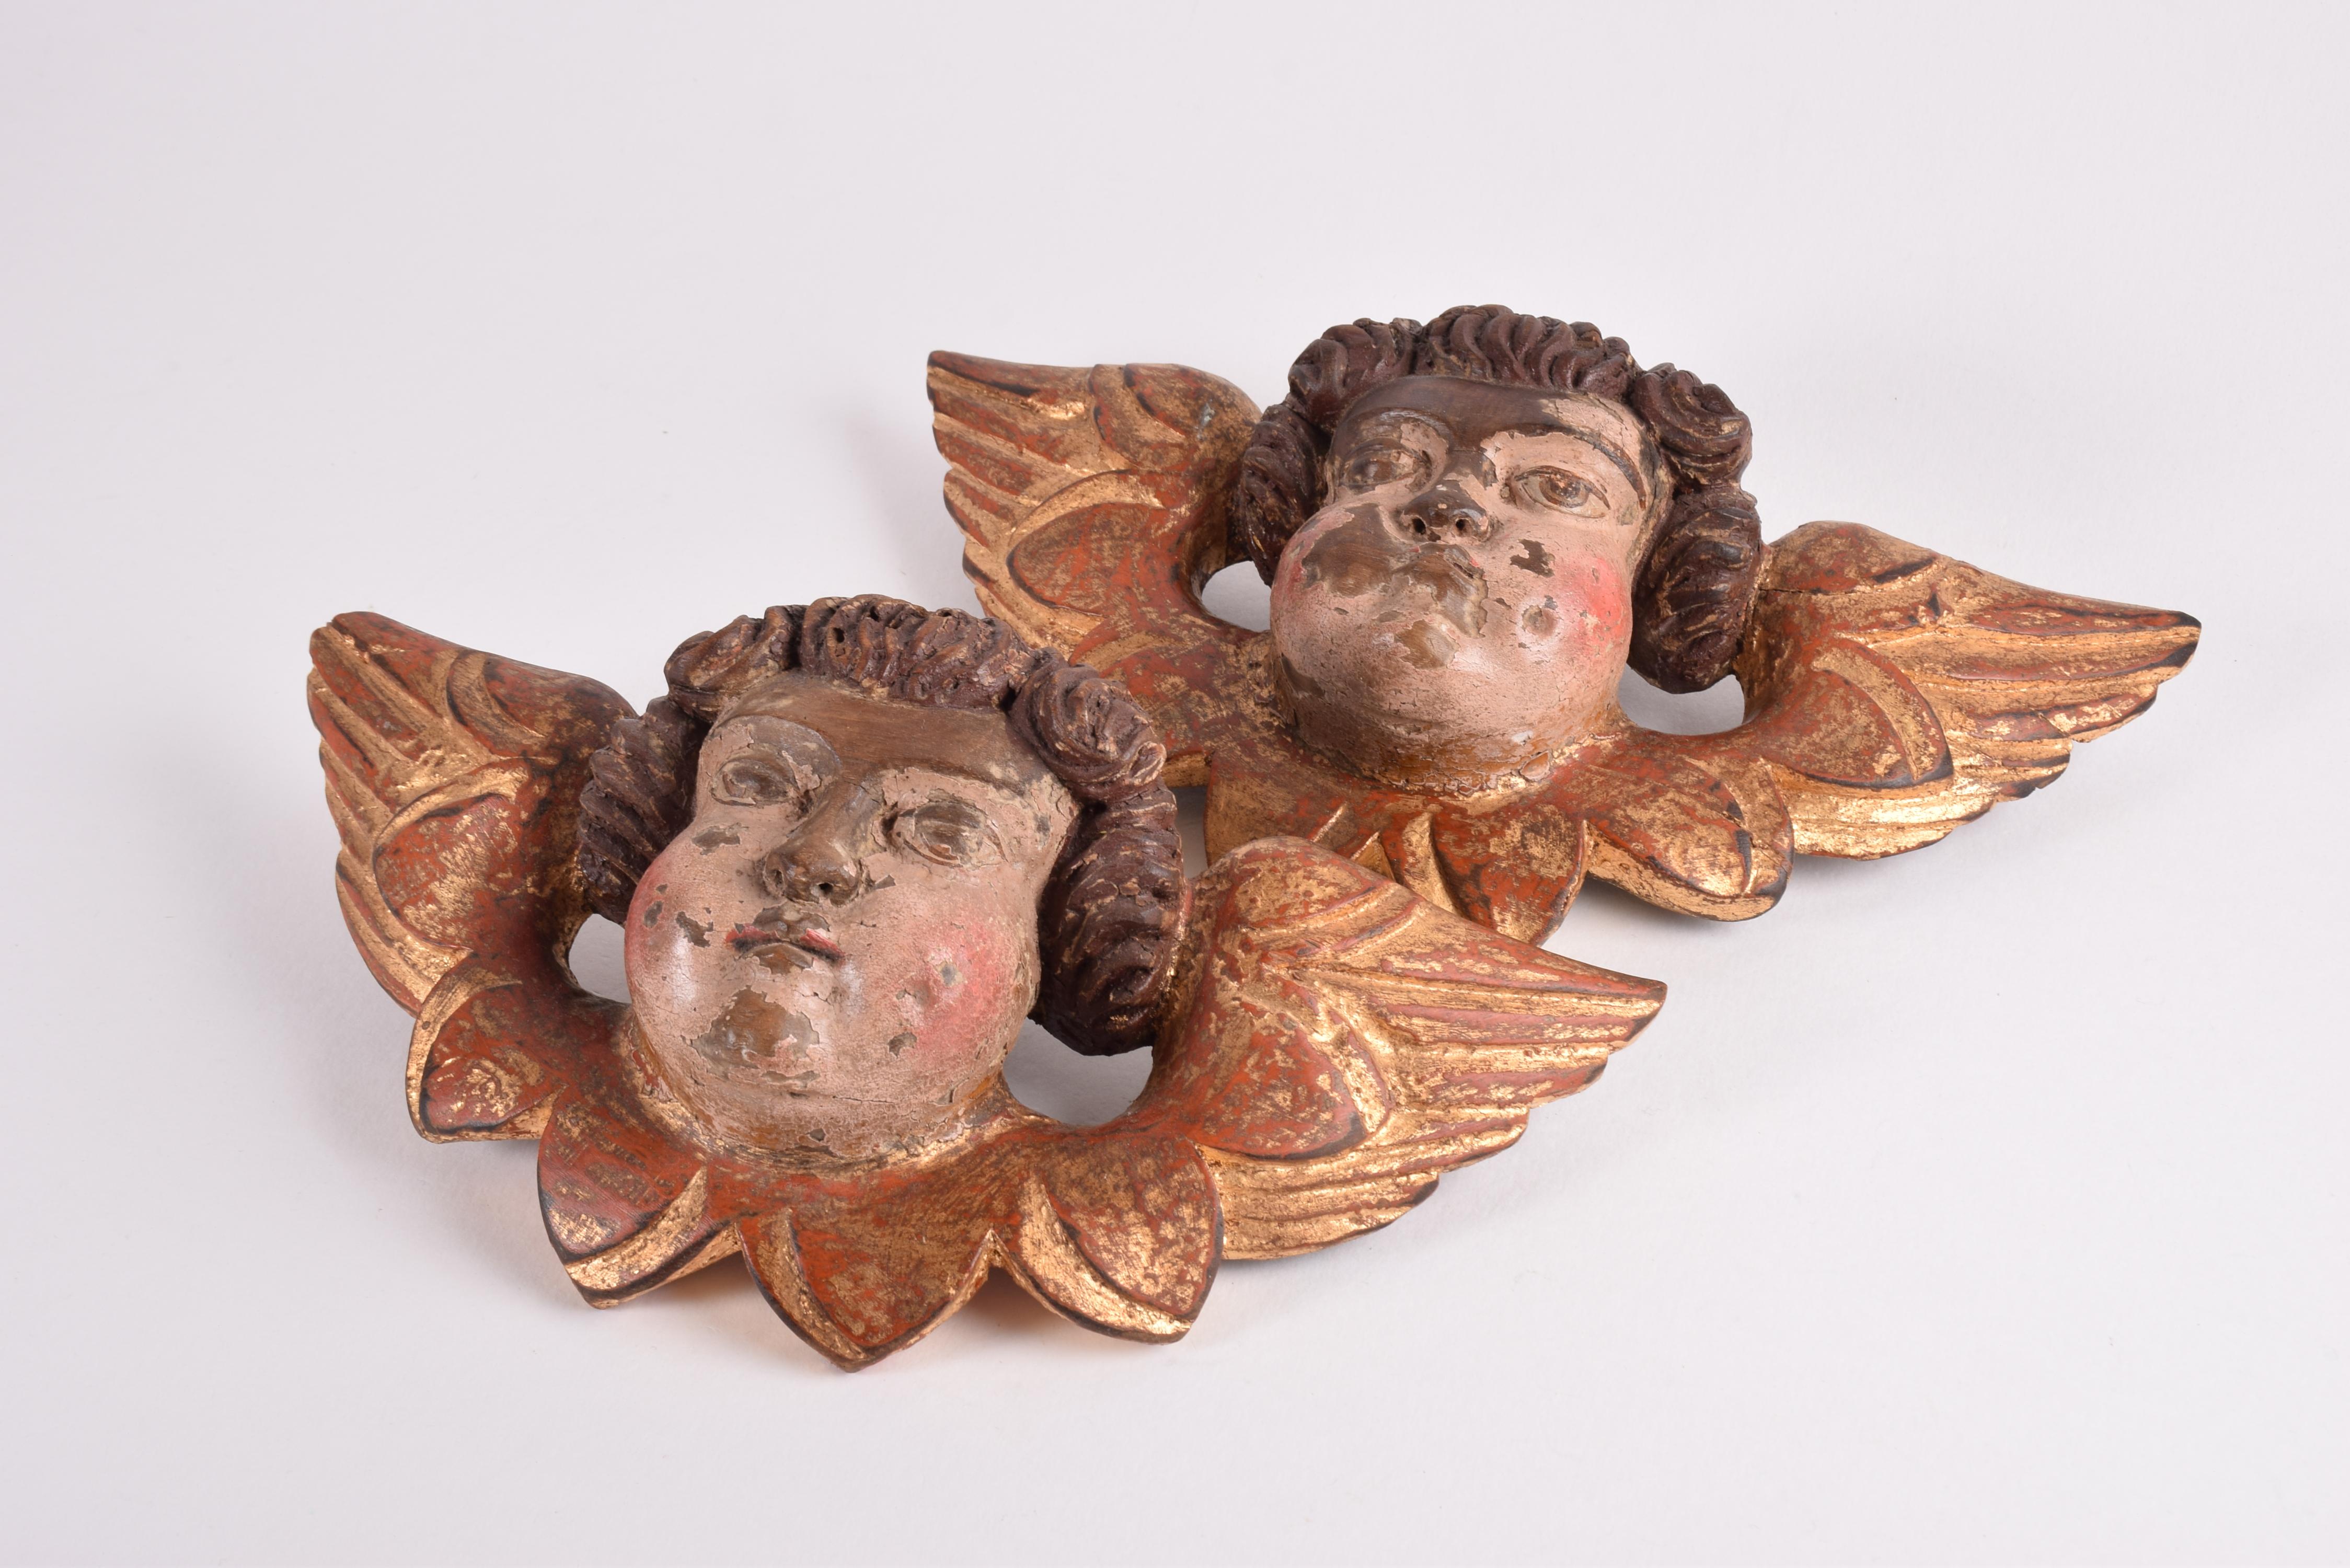 Pair of original Baroque wooden putti / winged cherubs.
We were told that they originate from a church in the French Pyrenees.
We suppose they are from circa 1650 to 1750.

The putti come with their original paint and gilt and show patina